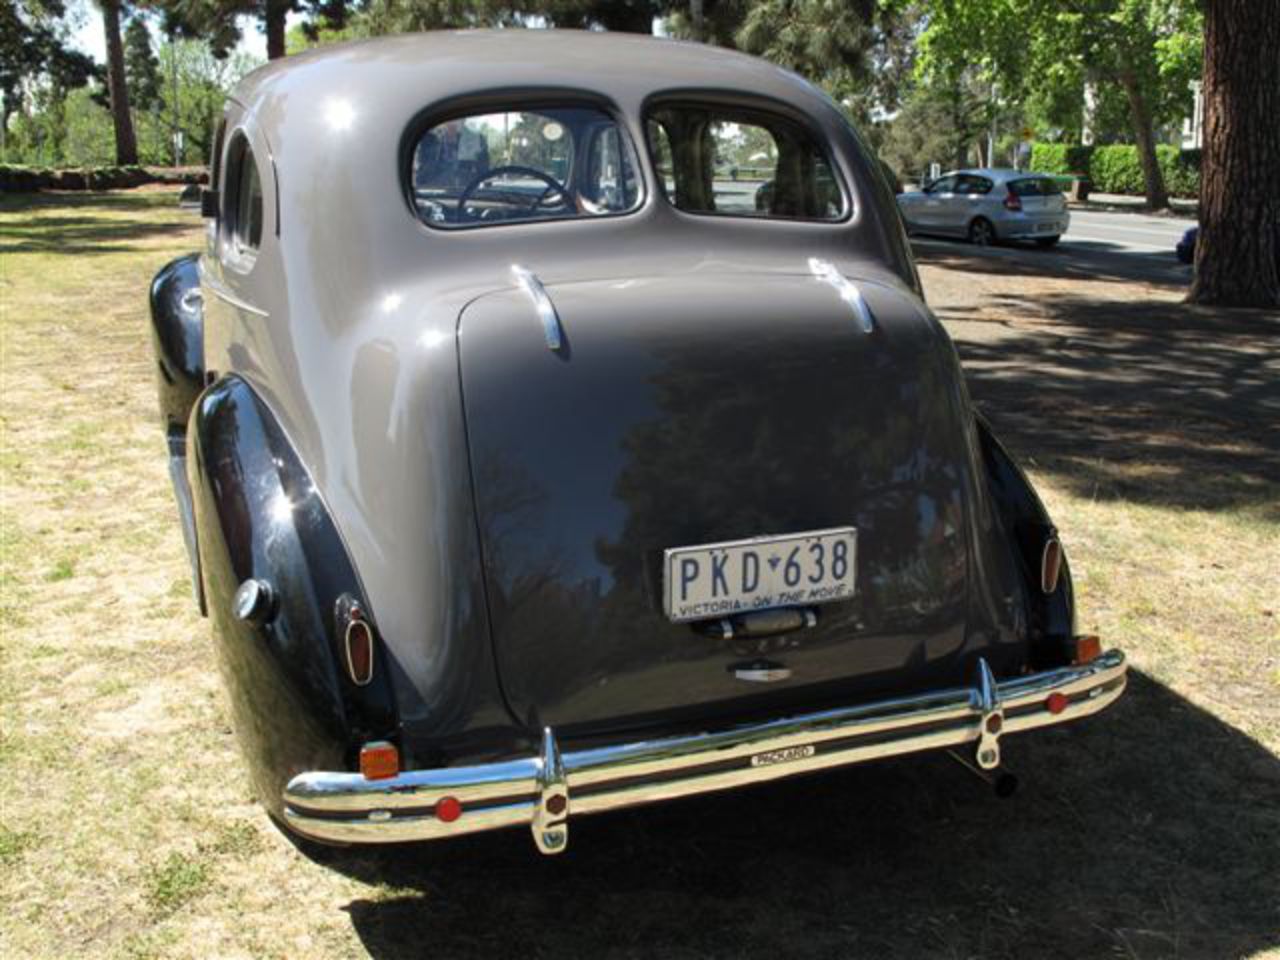 Cars for Films: Packard Sedan 1938 Classic Car for Hire